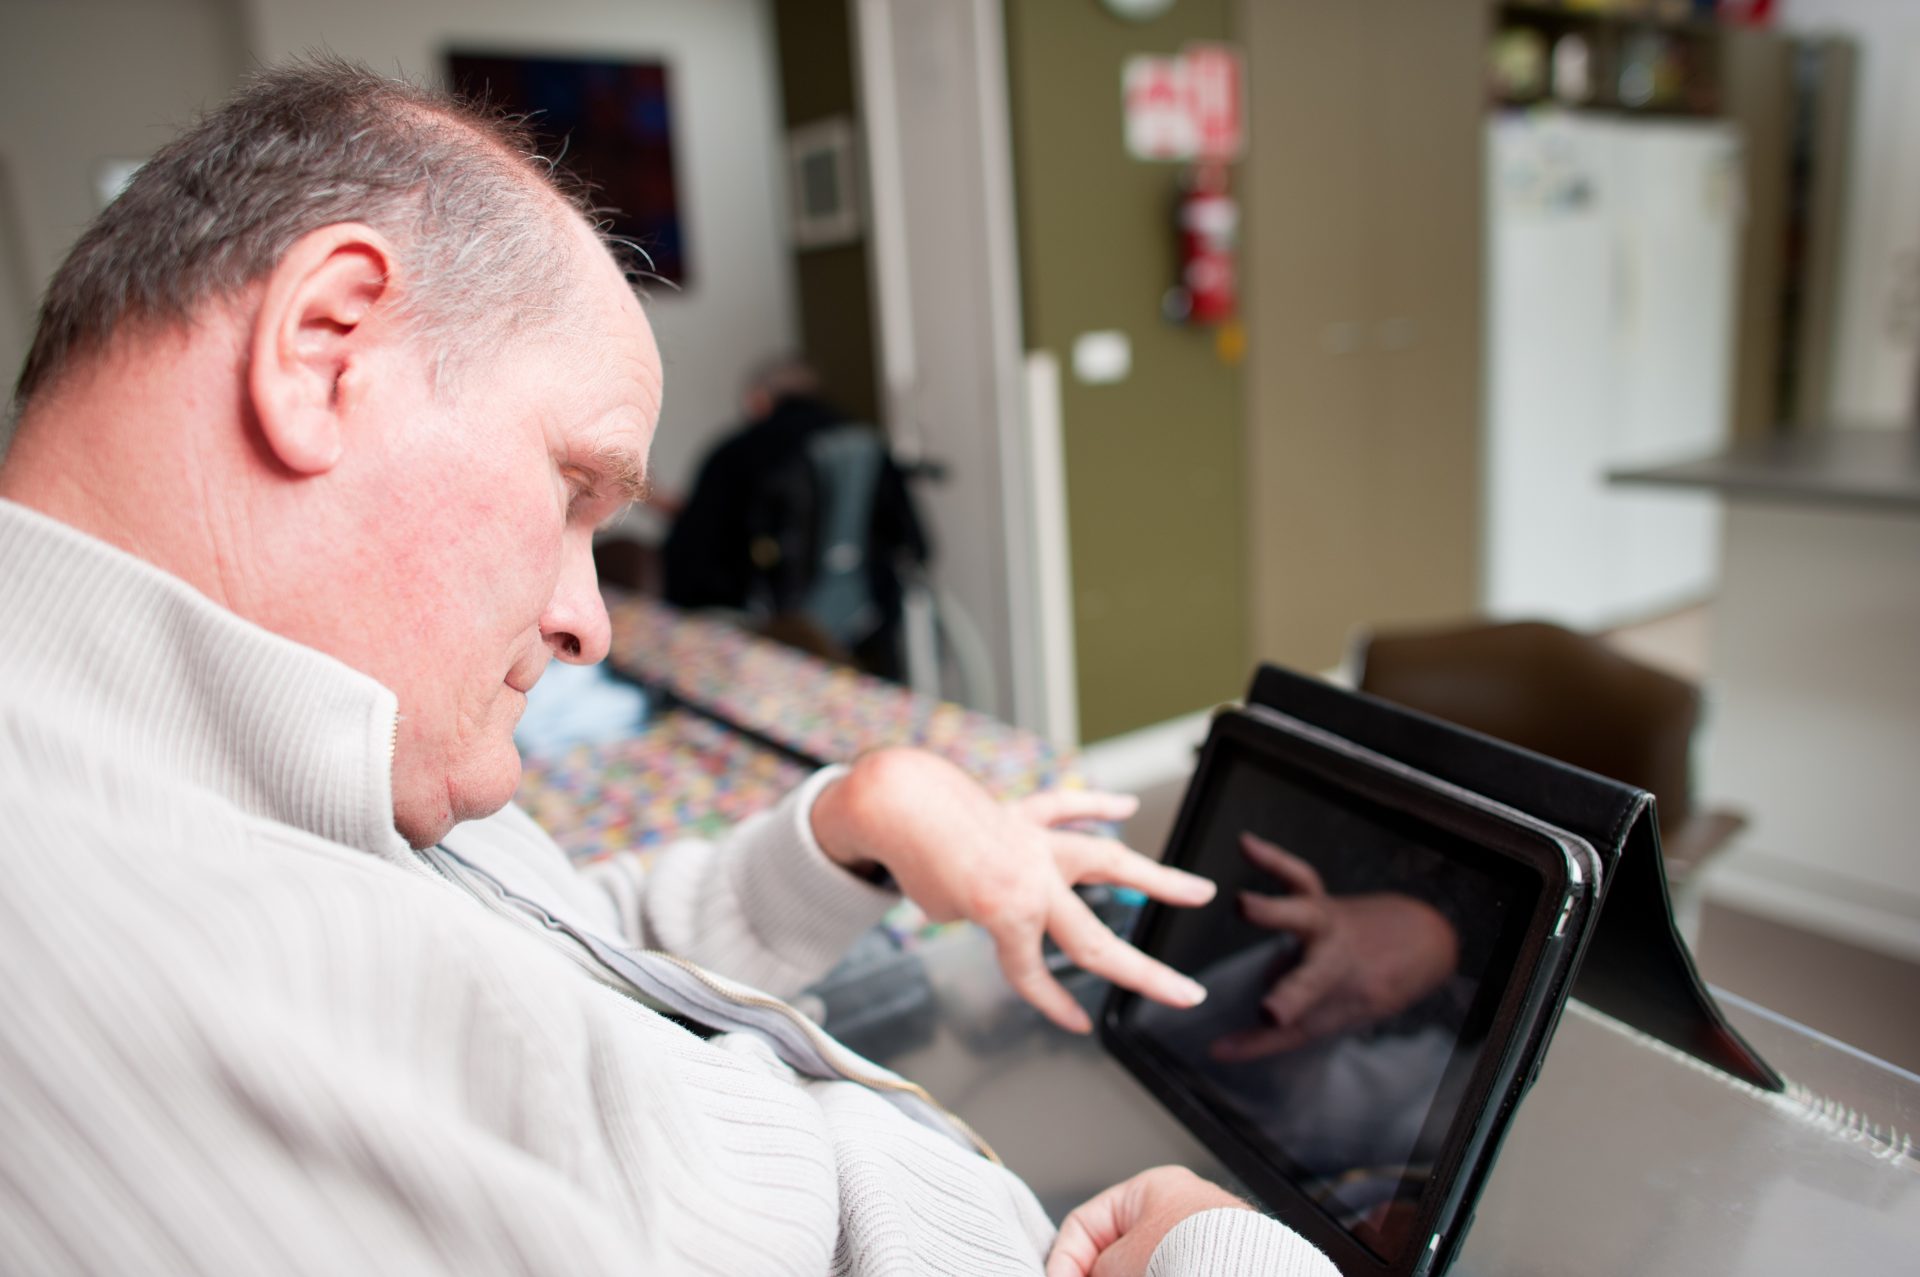 Mature aged man with a disability operating touchscreen computer.  The reflection of his hand can be seen on the screen.  He is seated in his living room.